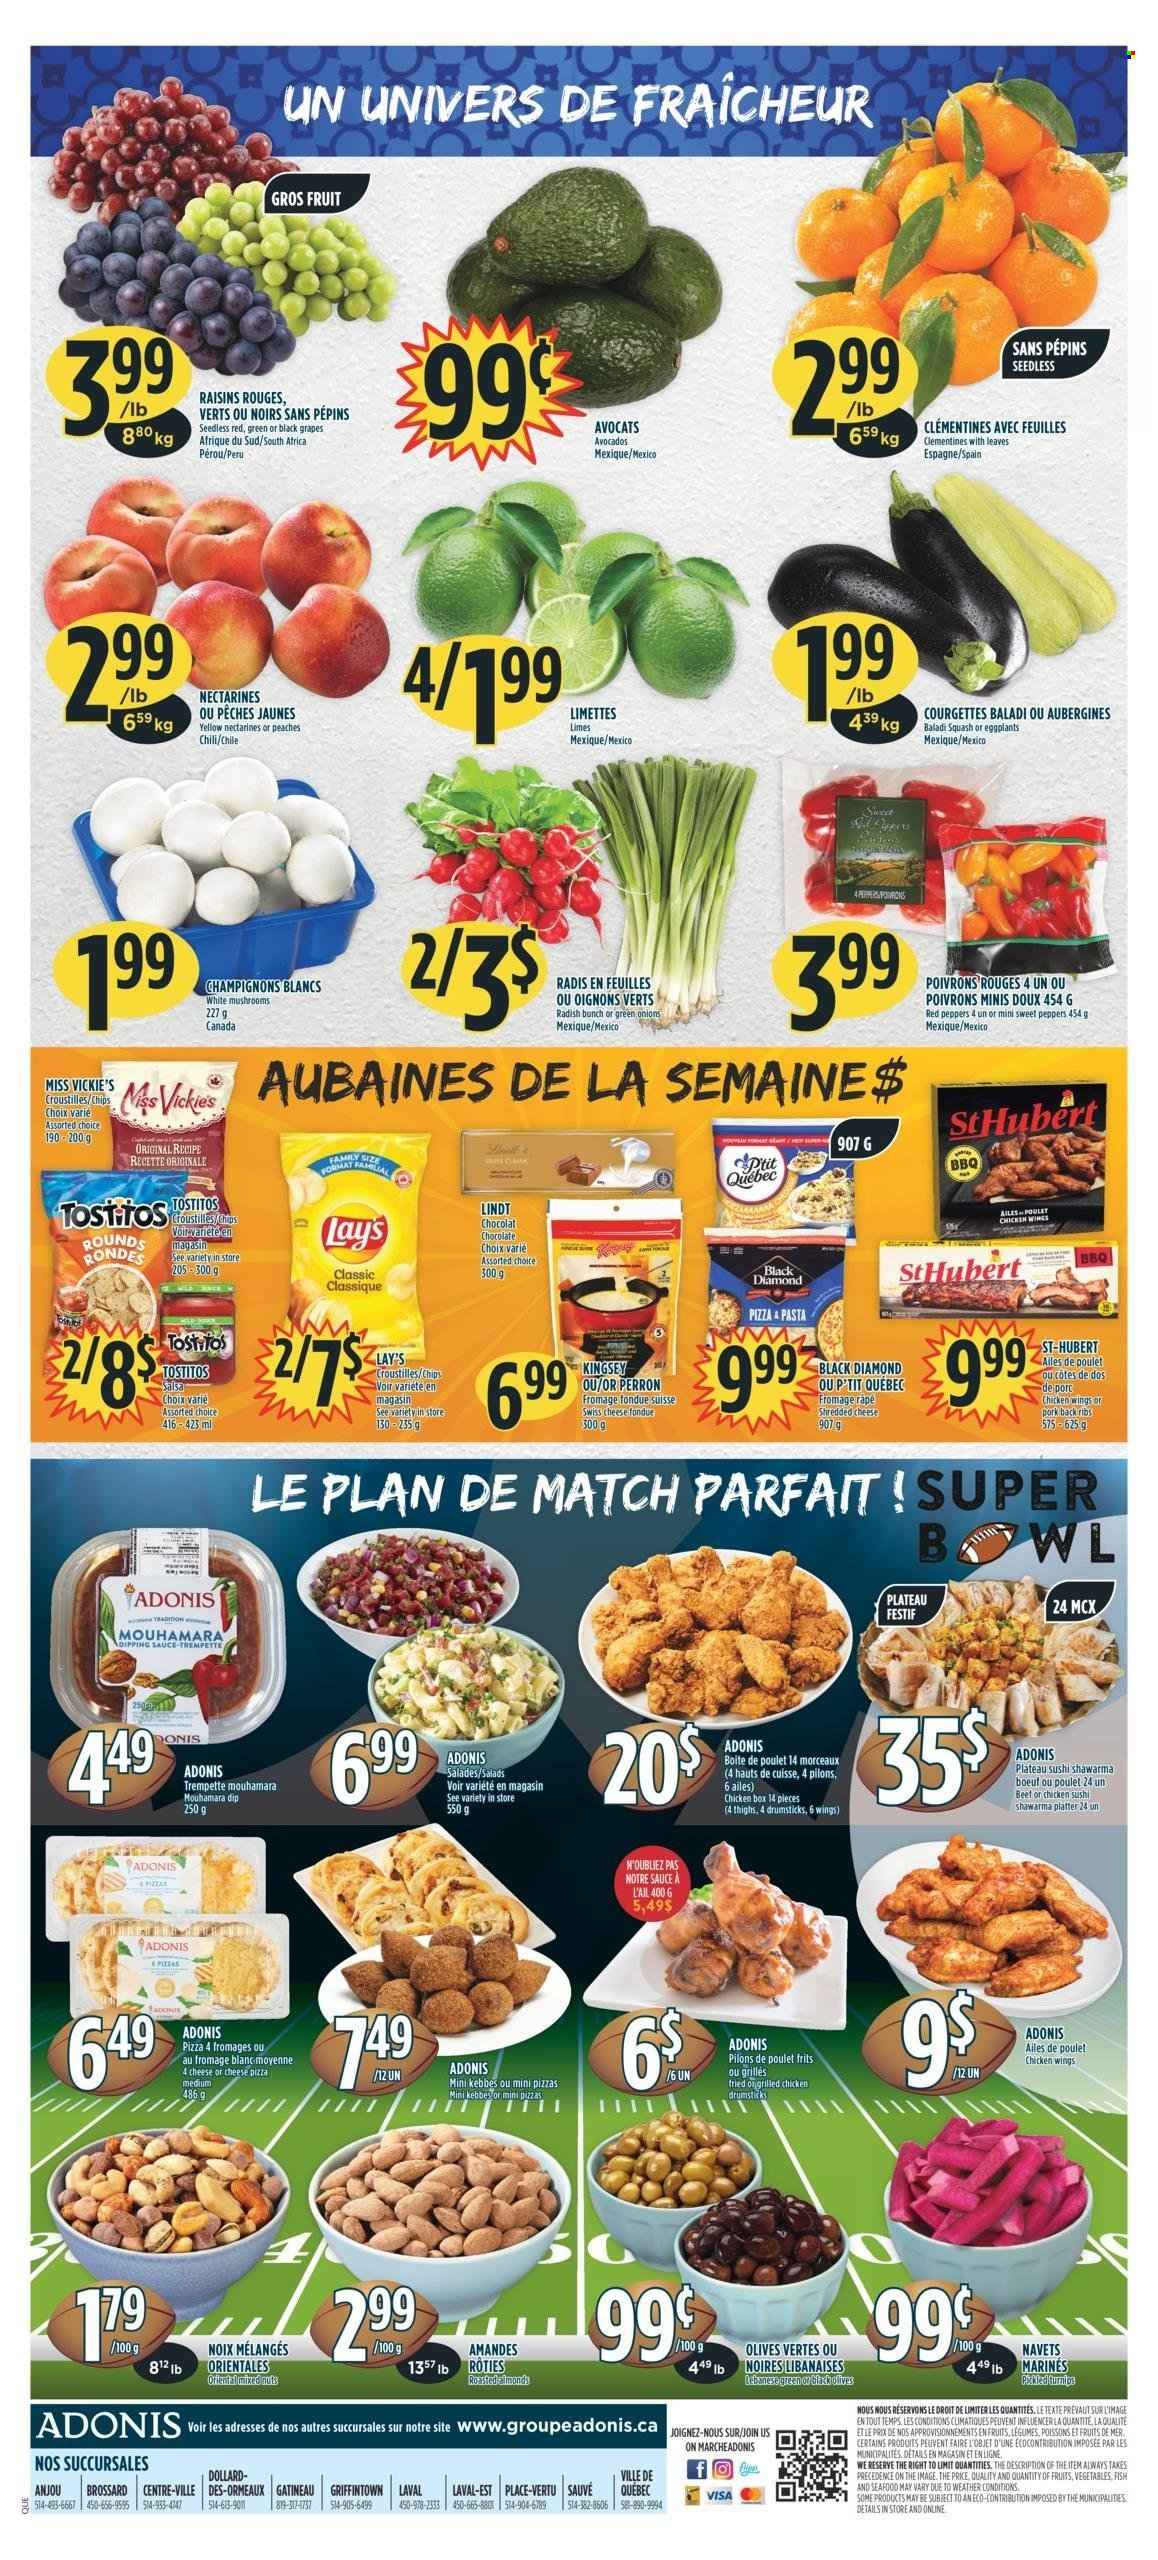 thumbnail - Adonis Flyer - February 09, 2023 - February 15, 2023 - Sales products - radishes, sweet peppers, eggplant, red peppers, avocado, clementines, grapes, limes, nectarines, peaches, seafood, pizza, pasta, sauce, shredded cheese, swiss cheese, chicken wings, chocolate, chips, Lay’s, Tostitos, salsa, almonds, dried fruit, mixed nuts, chicken drumsticks, chicken, ribs, pork meat, pork ribs, pork back ribs, bowl, raisins, olives, Lindt. Page 2.